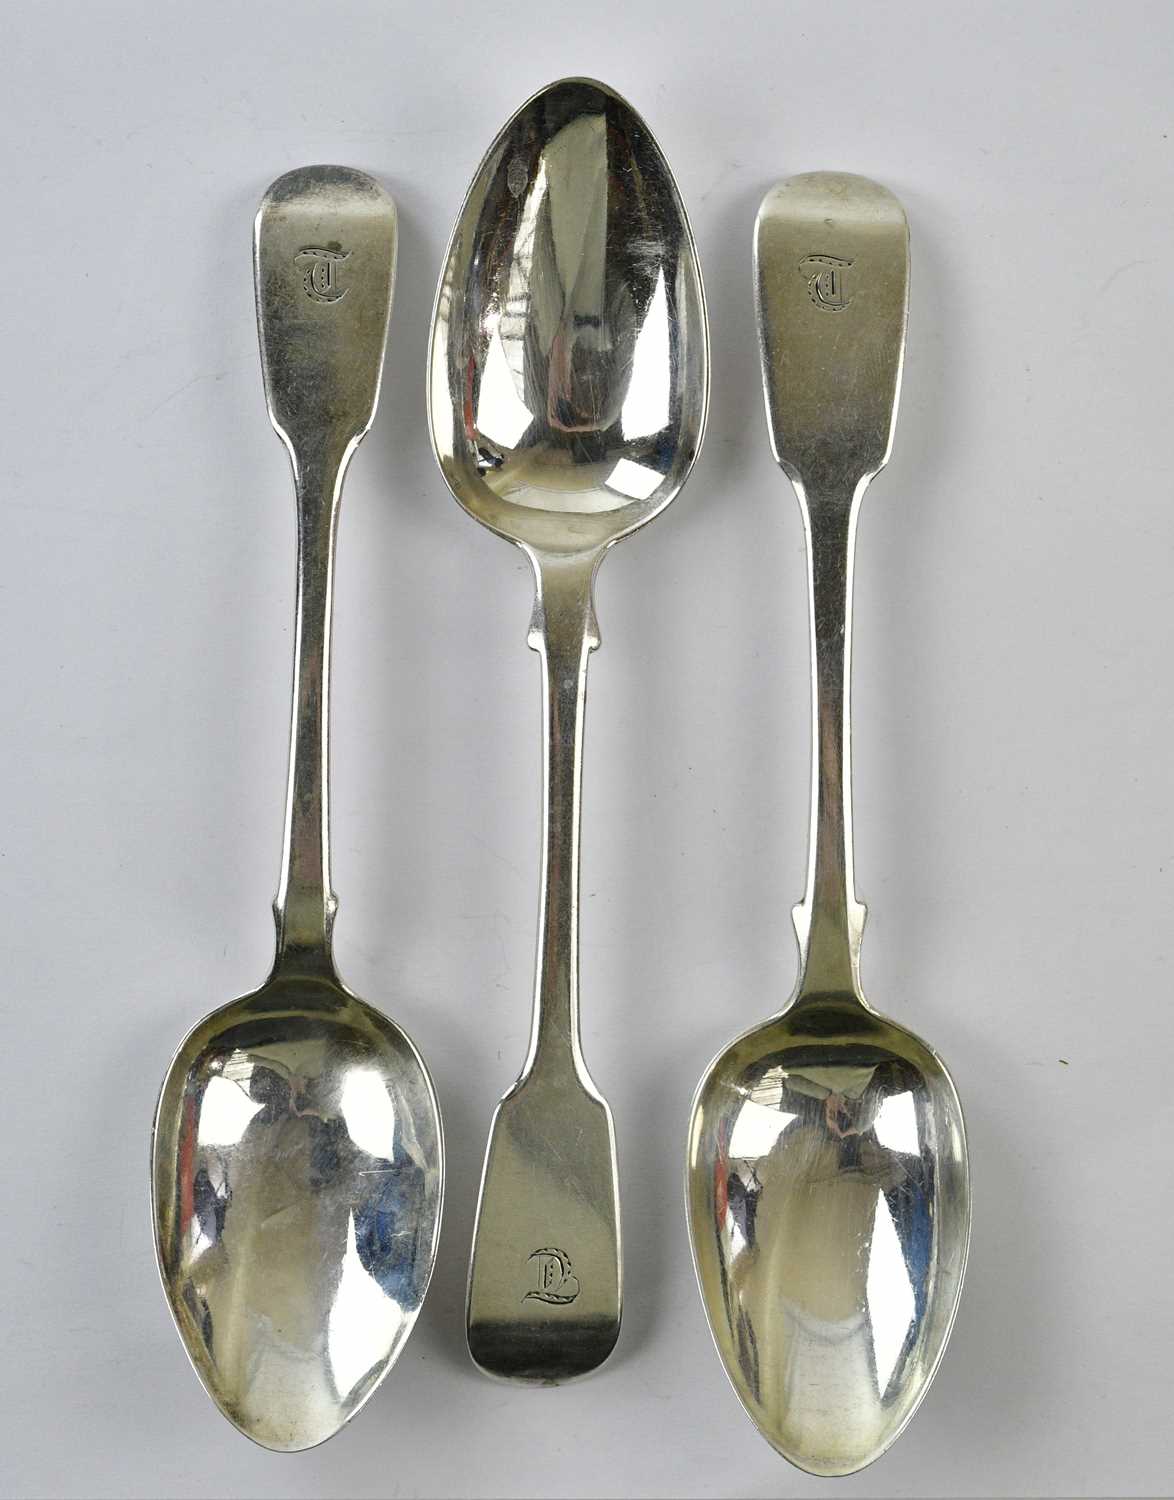 JAMES BEEBE; a pair of Victorian hallmarked silver spoons, London 1839, together with a further